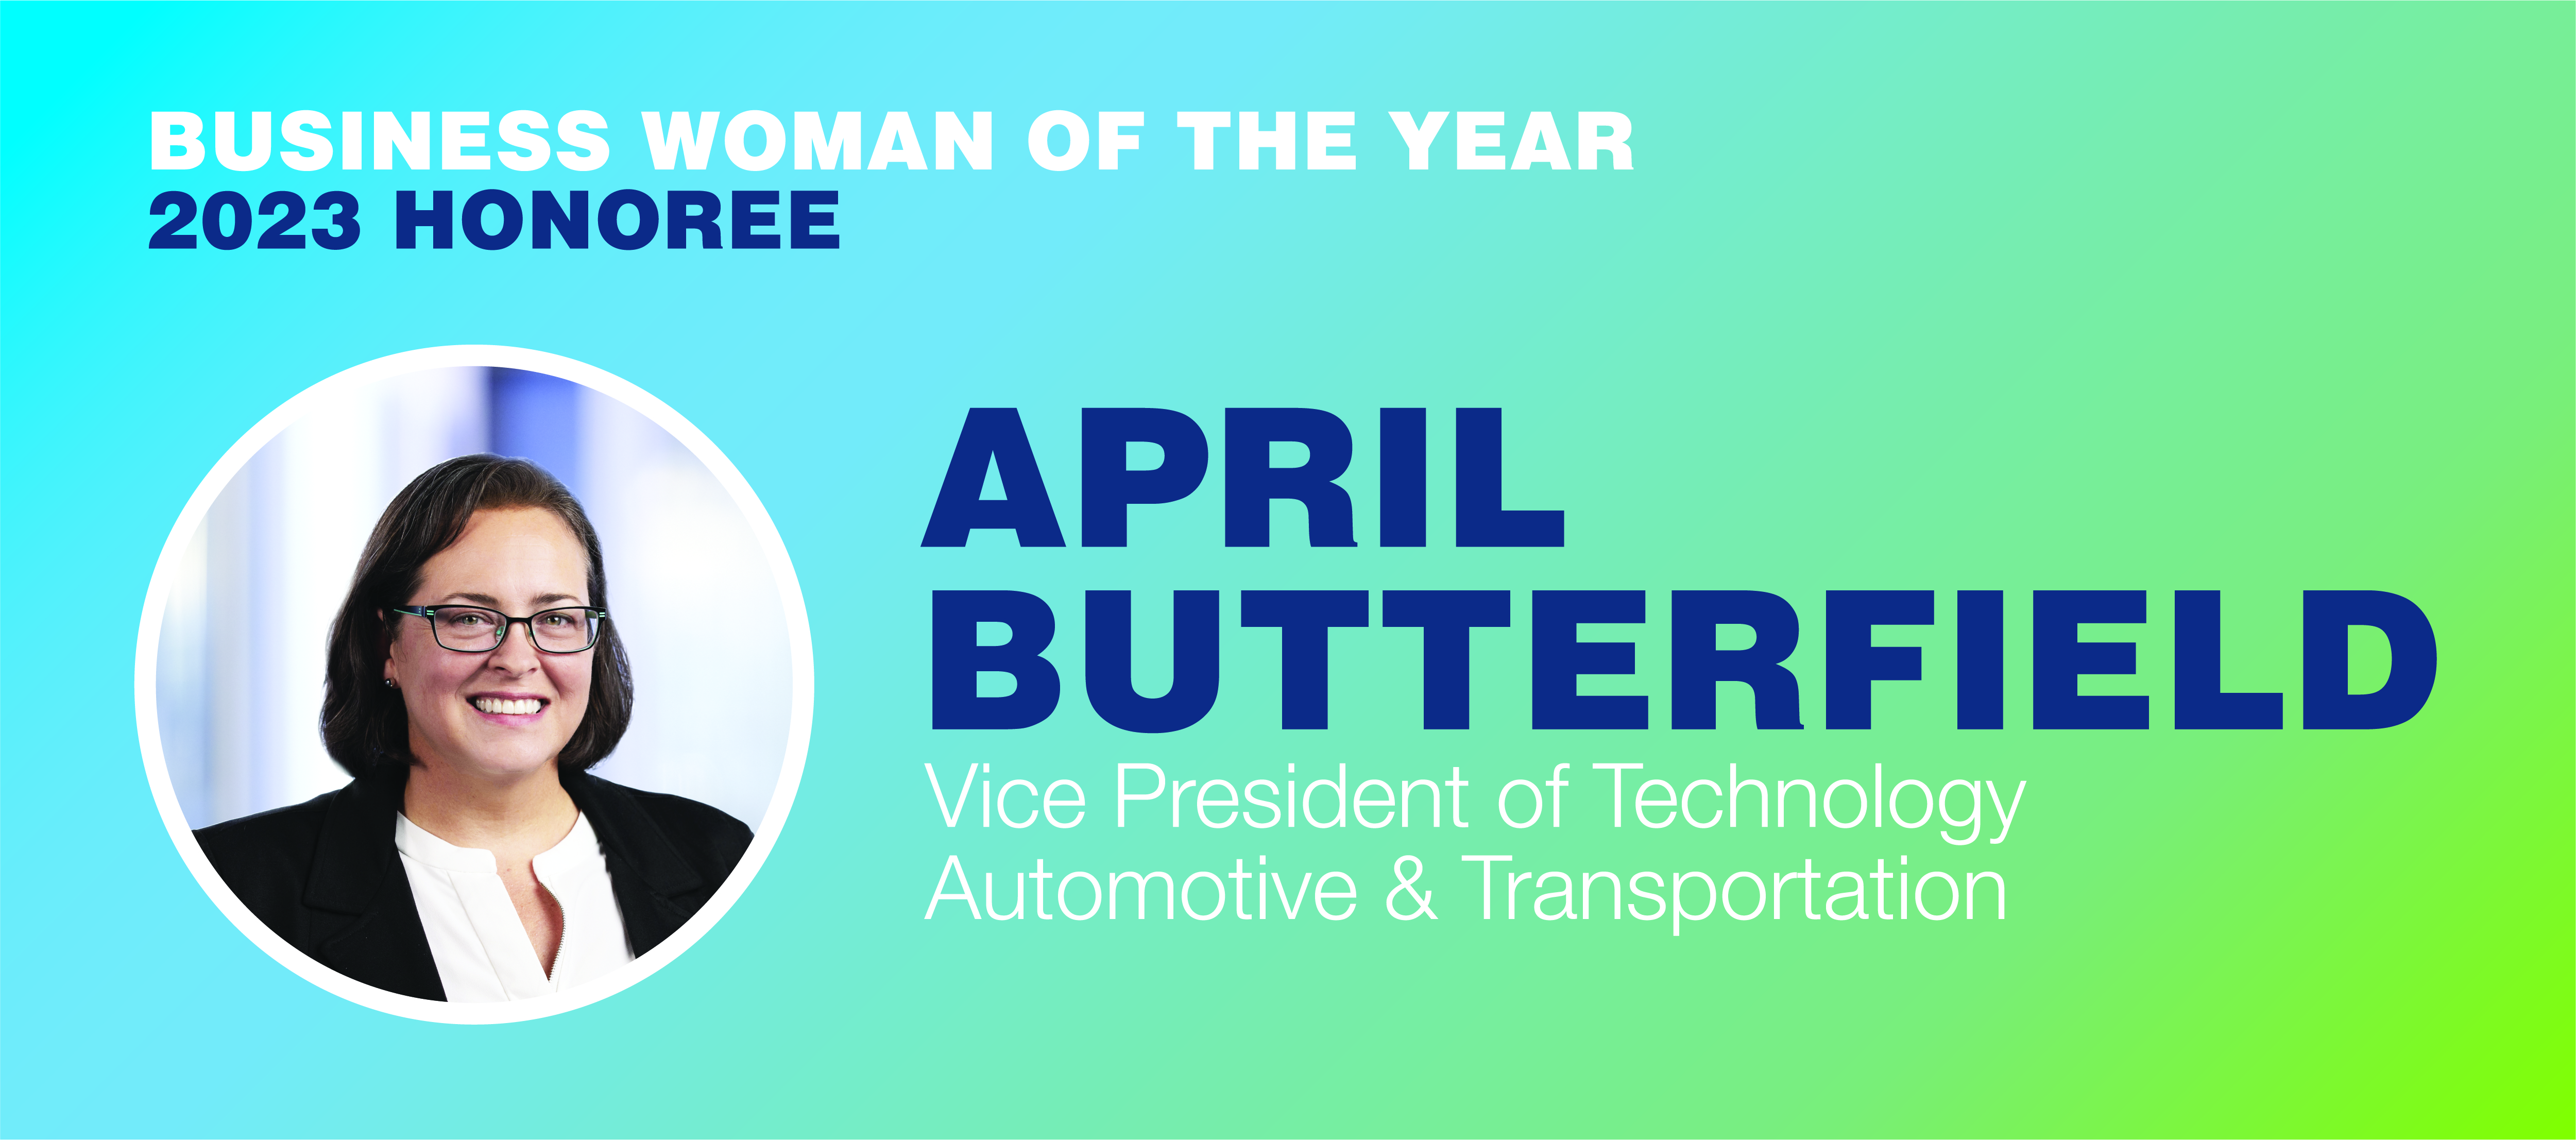 April Butterfield, vice president of Technology, Automotive and Transportation, has been named a 2023 Businesswoman of the Year by the Tampa Bay Business Journal (TBBJ).